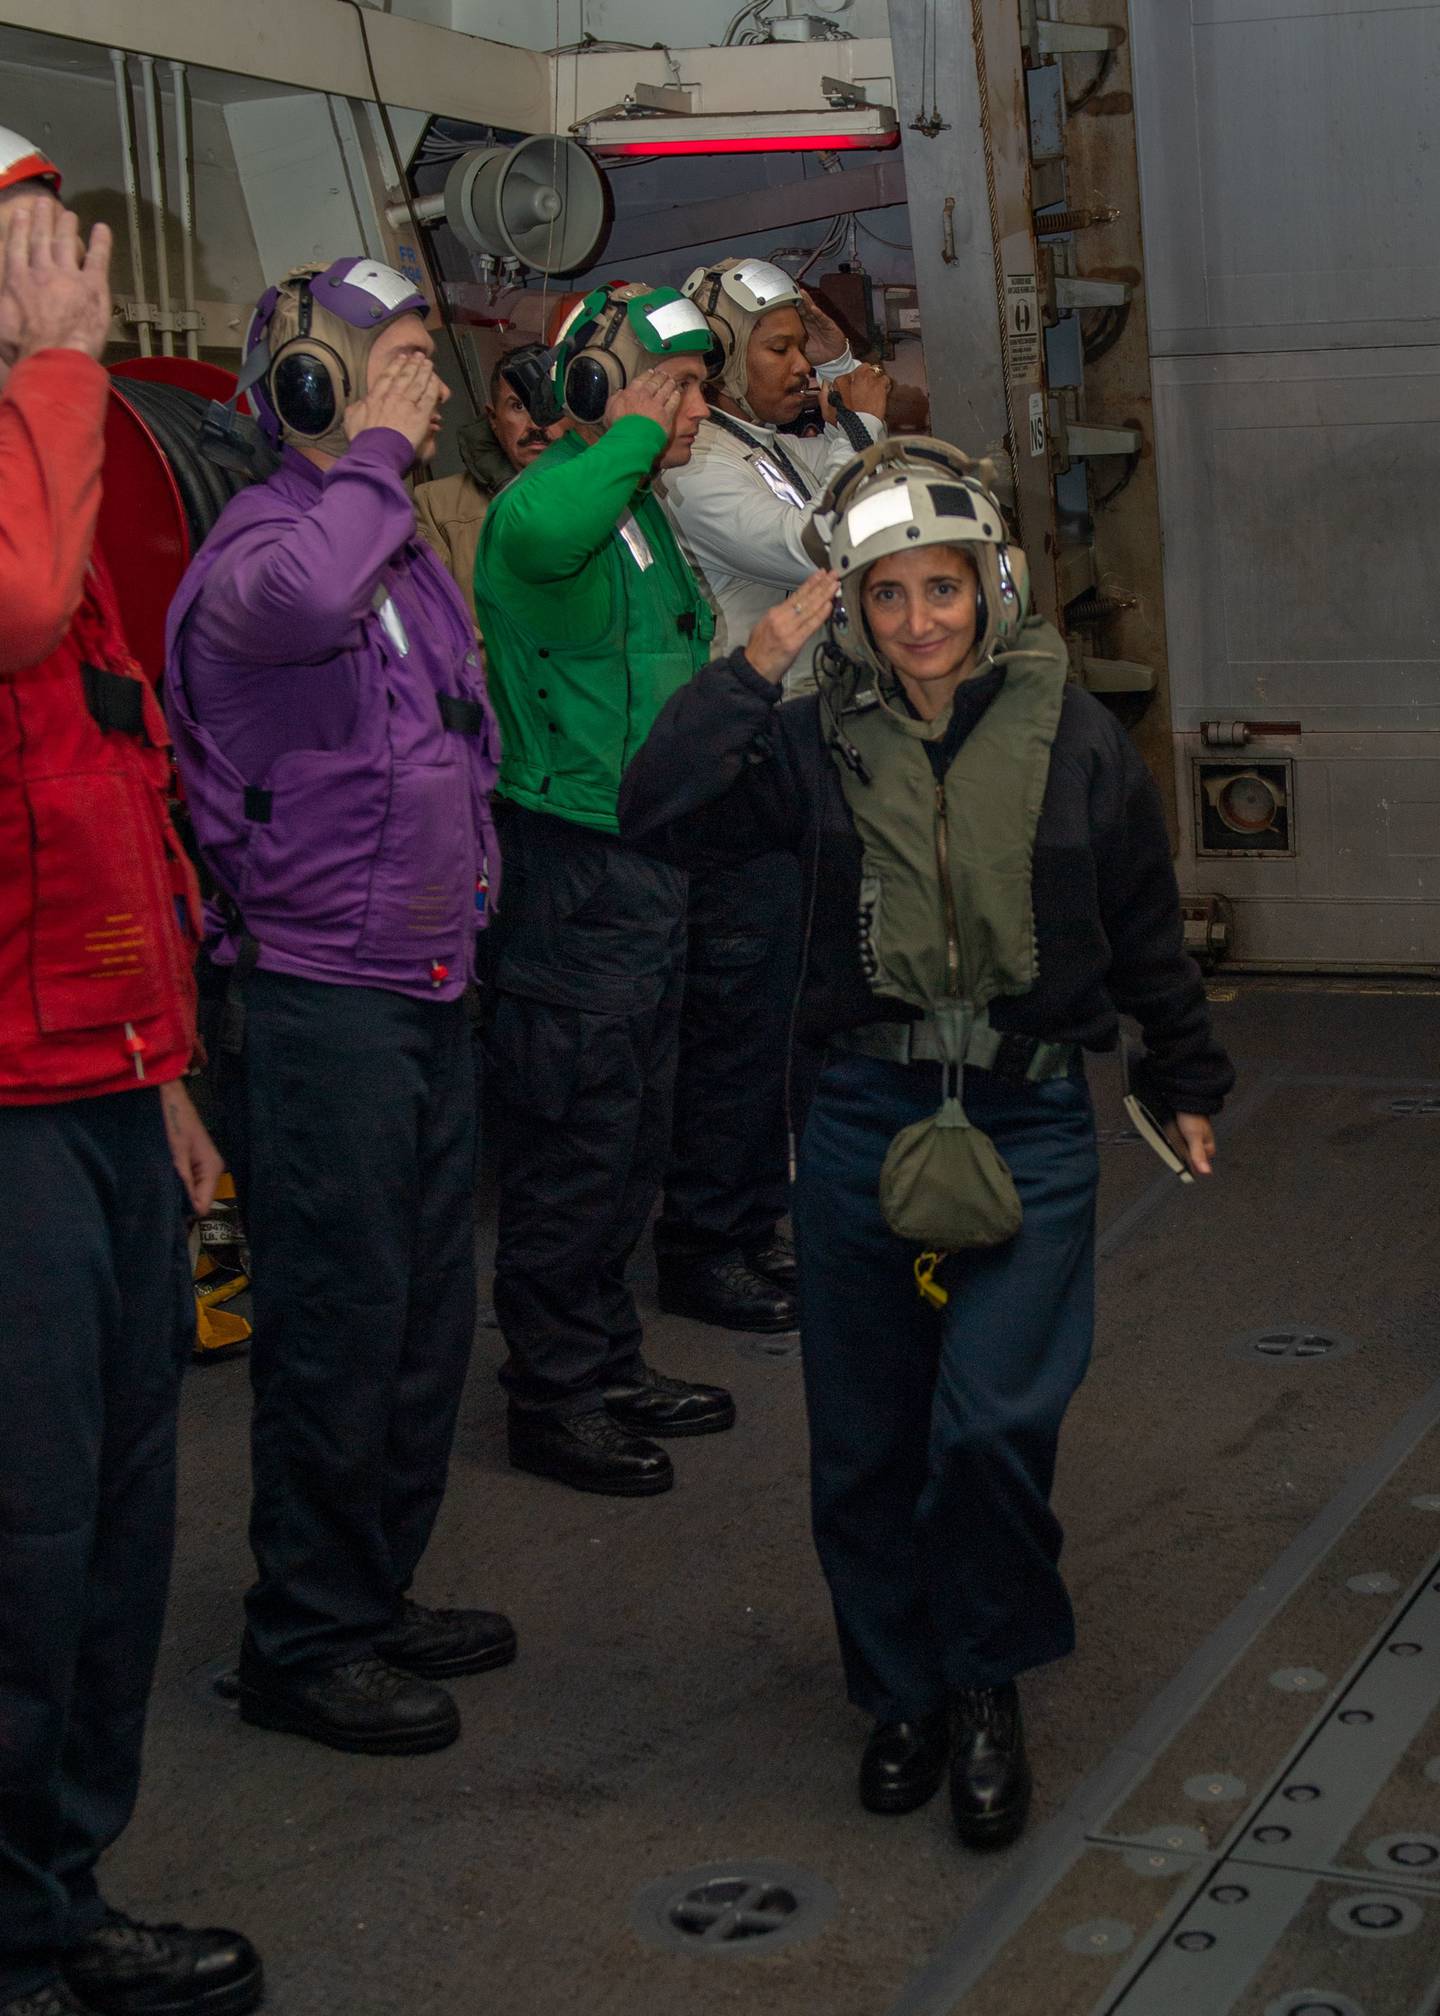 Yvette Davids, then commander of the Nimitz Carrier Strike Group, passes through the USS Sterett in 2020. Now a vice admiral, Davids is the first woman nominated to be superintendent of the Naval Academy.